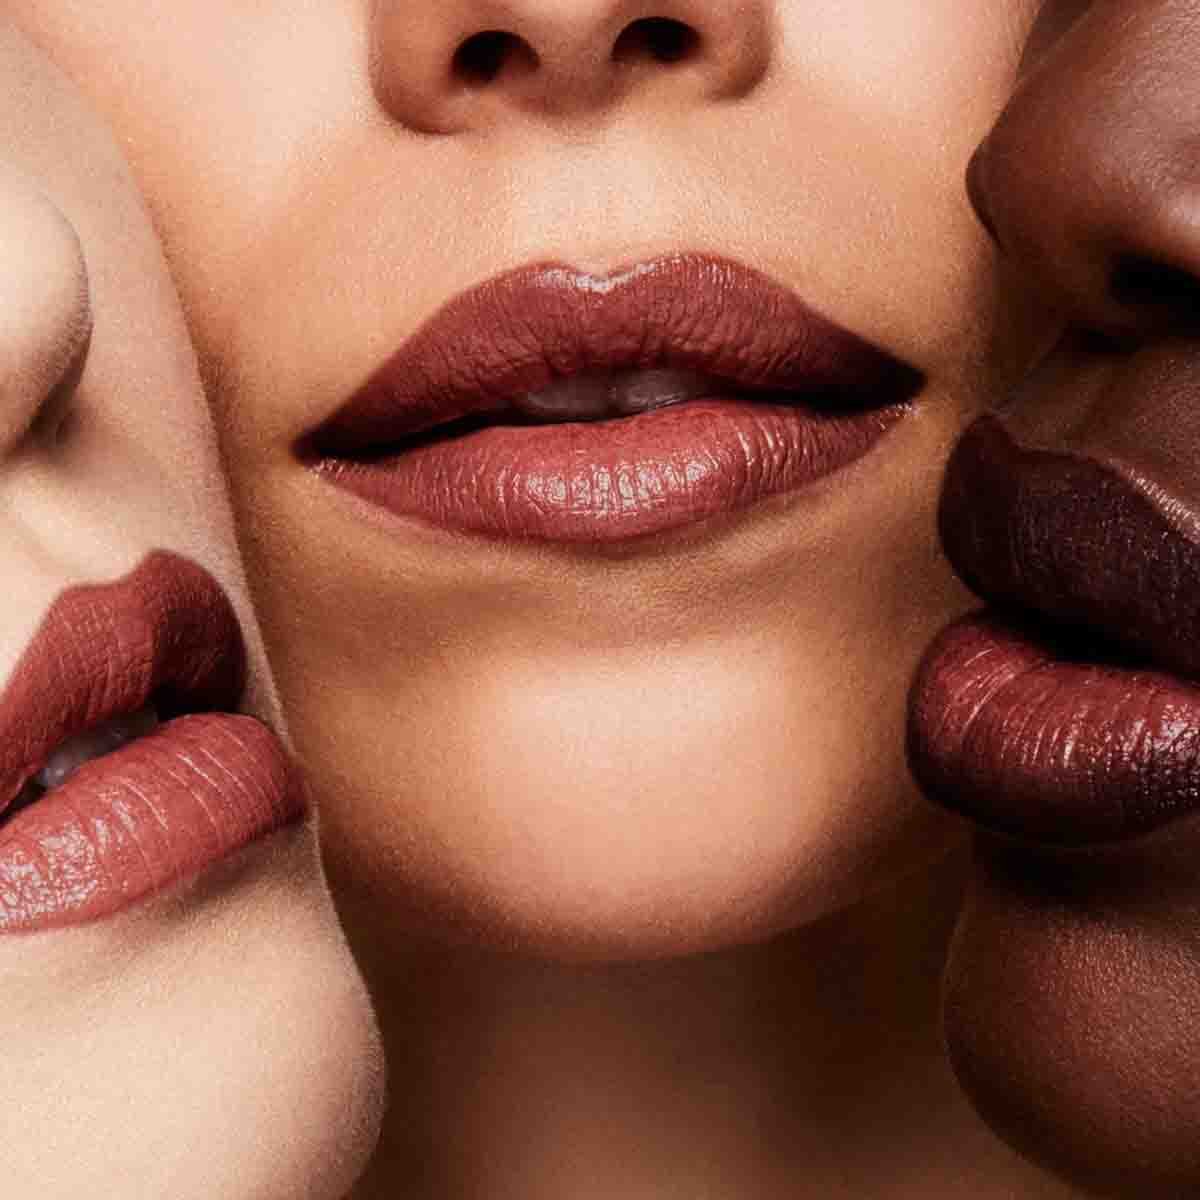 Lip Color Magnetic Attraction Tom Ford